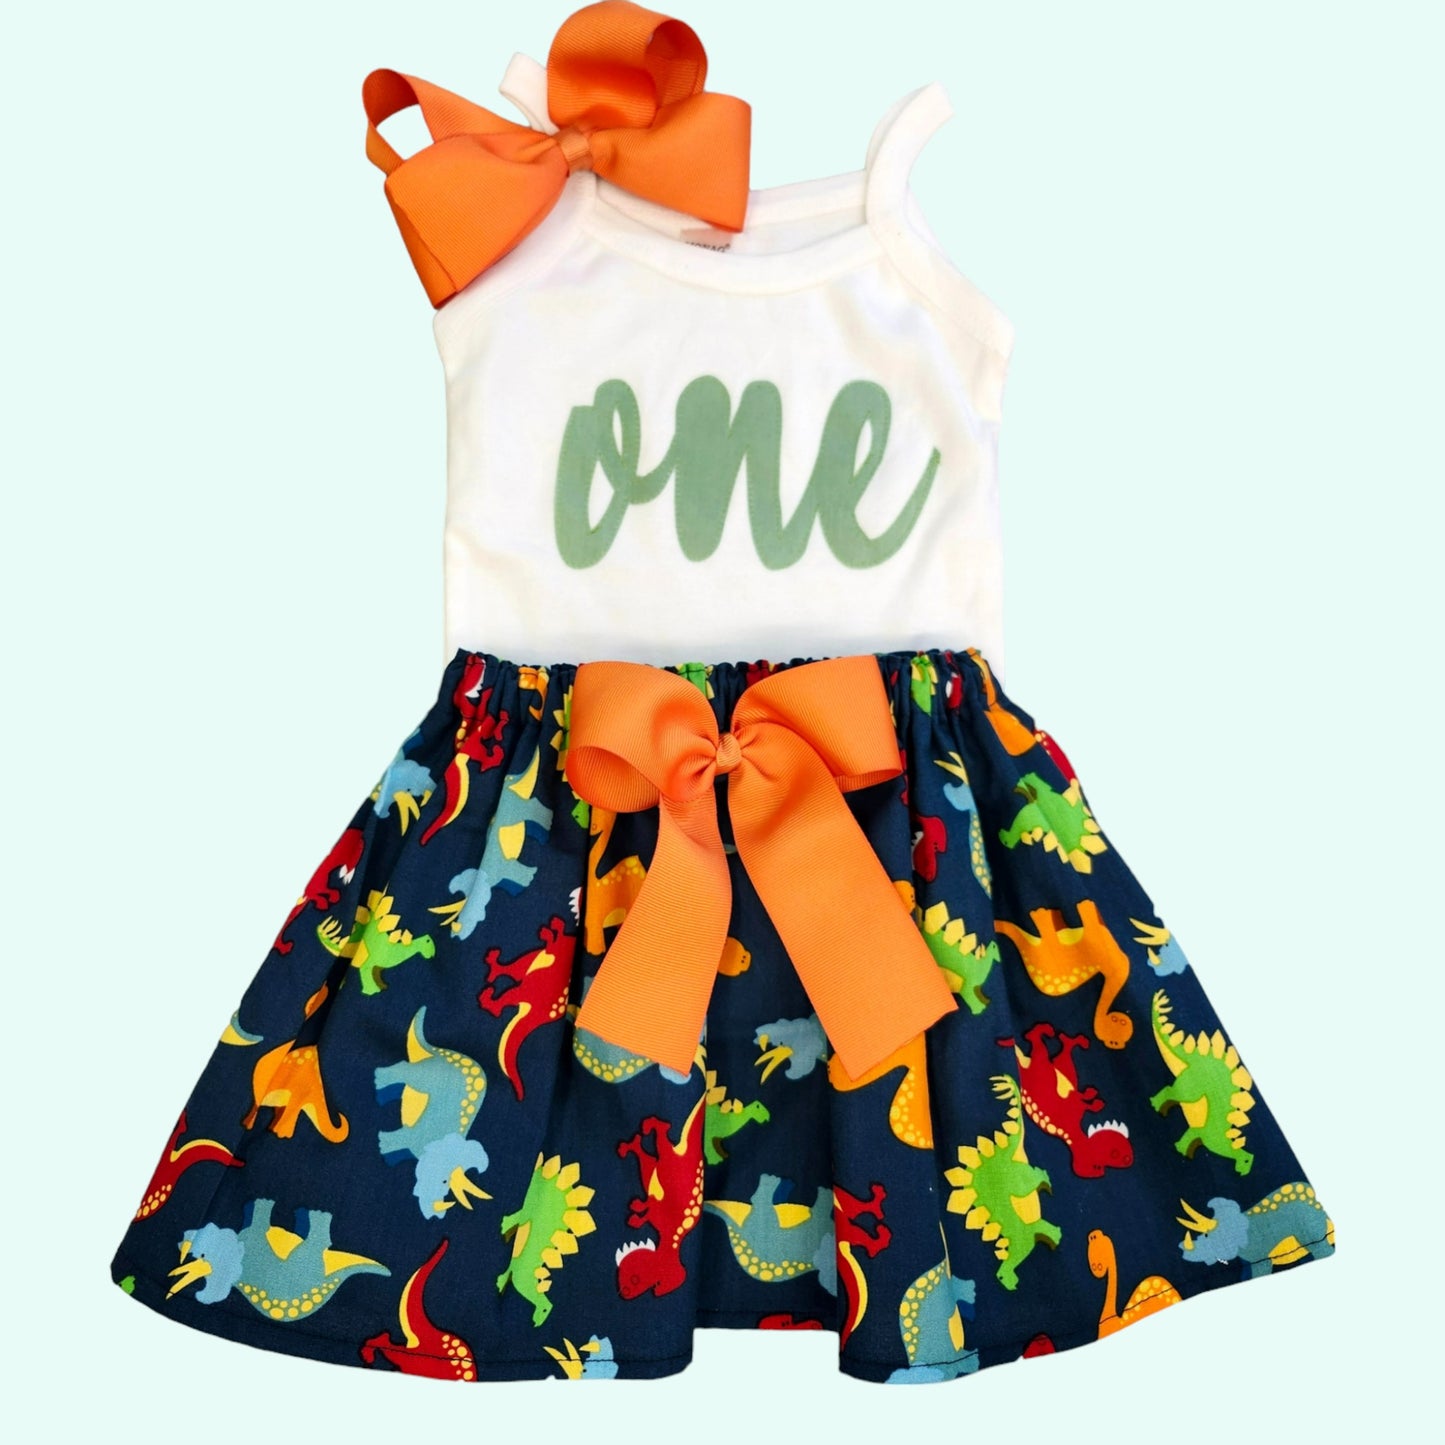 Dinosaurs girls outfit, Birthday age outfit, Dinosaurs skirt for girls, Dinosaurs outfit, Girls summer skirt shirt outfit